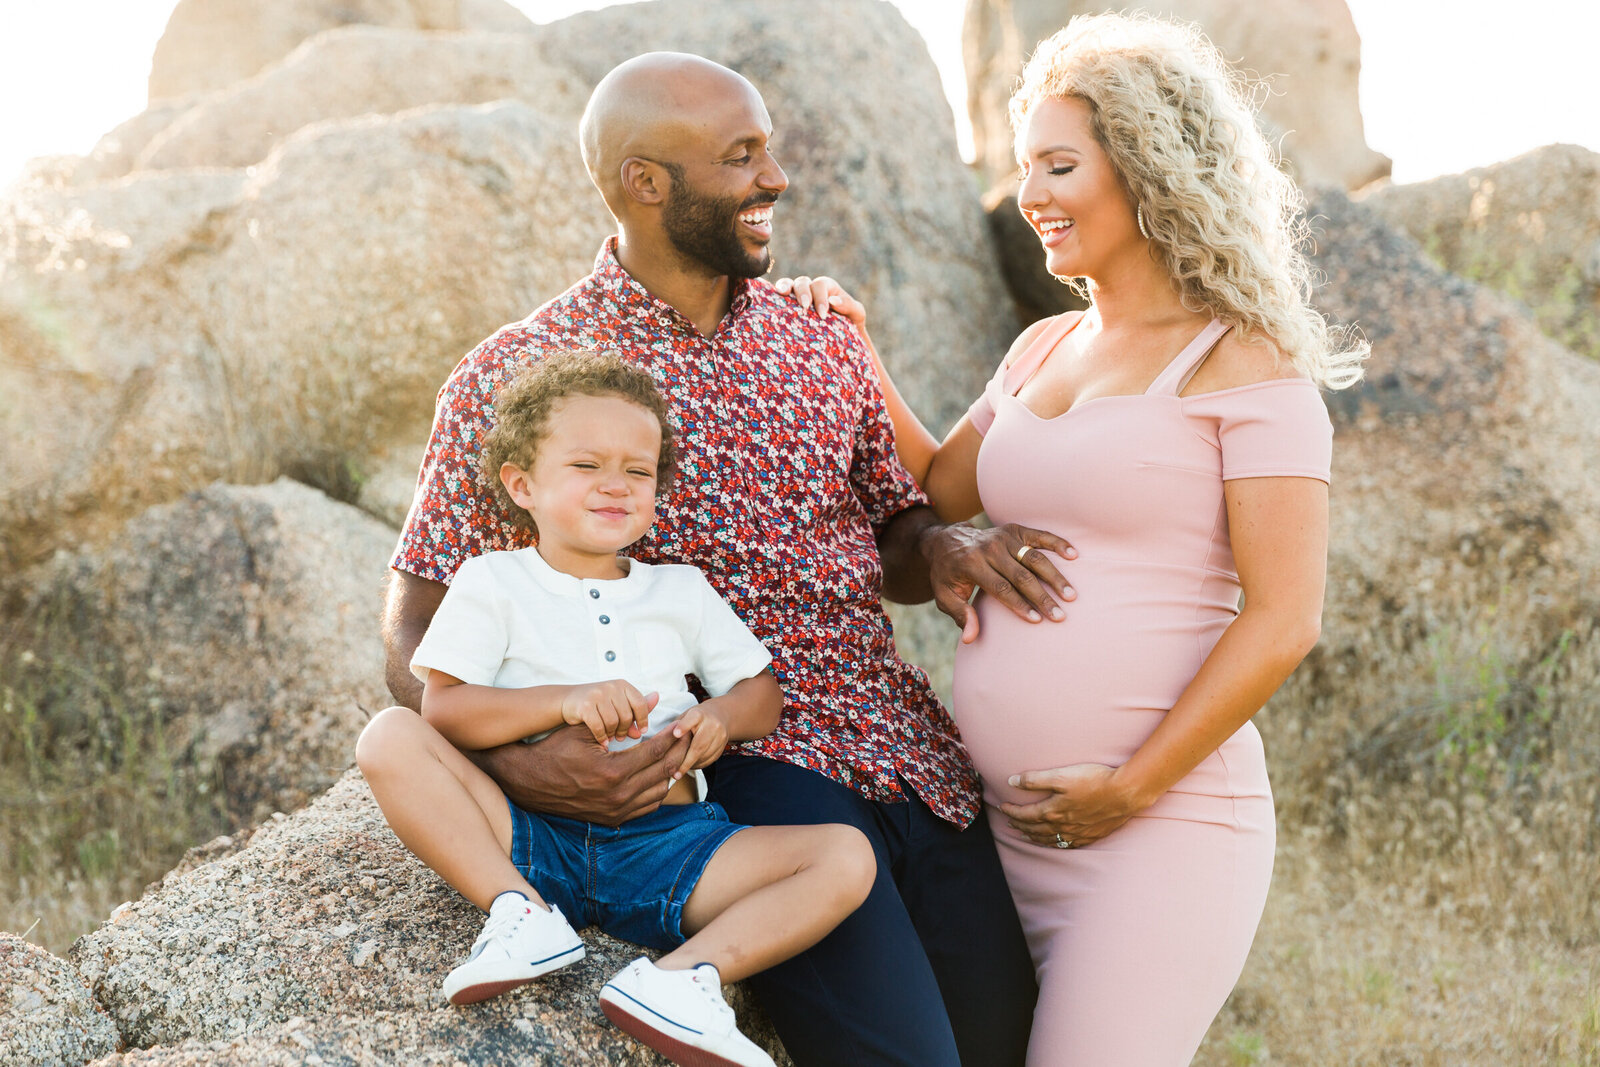 family holding baby bump in maternity photo